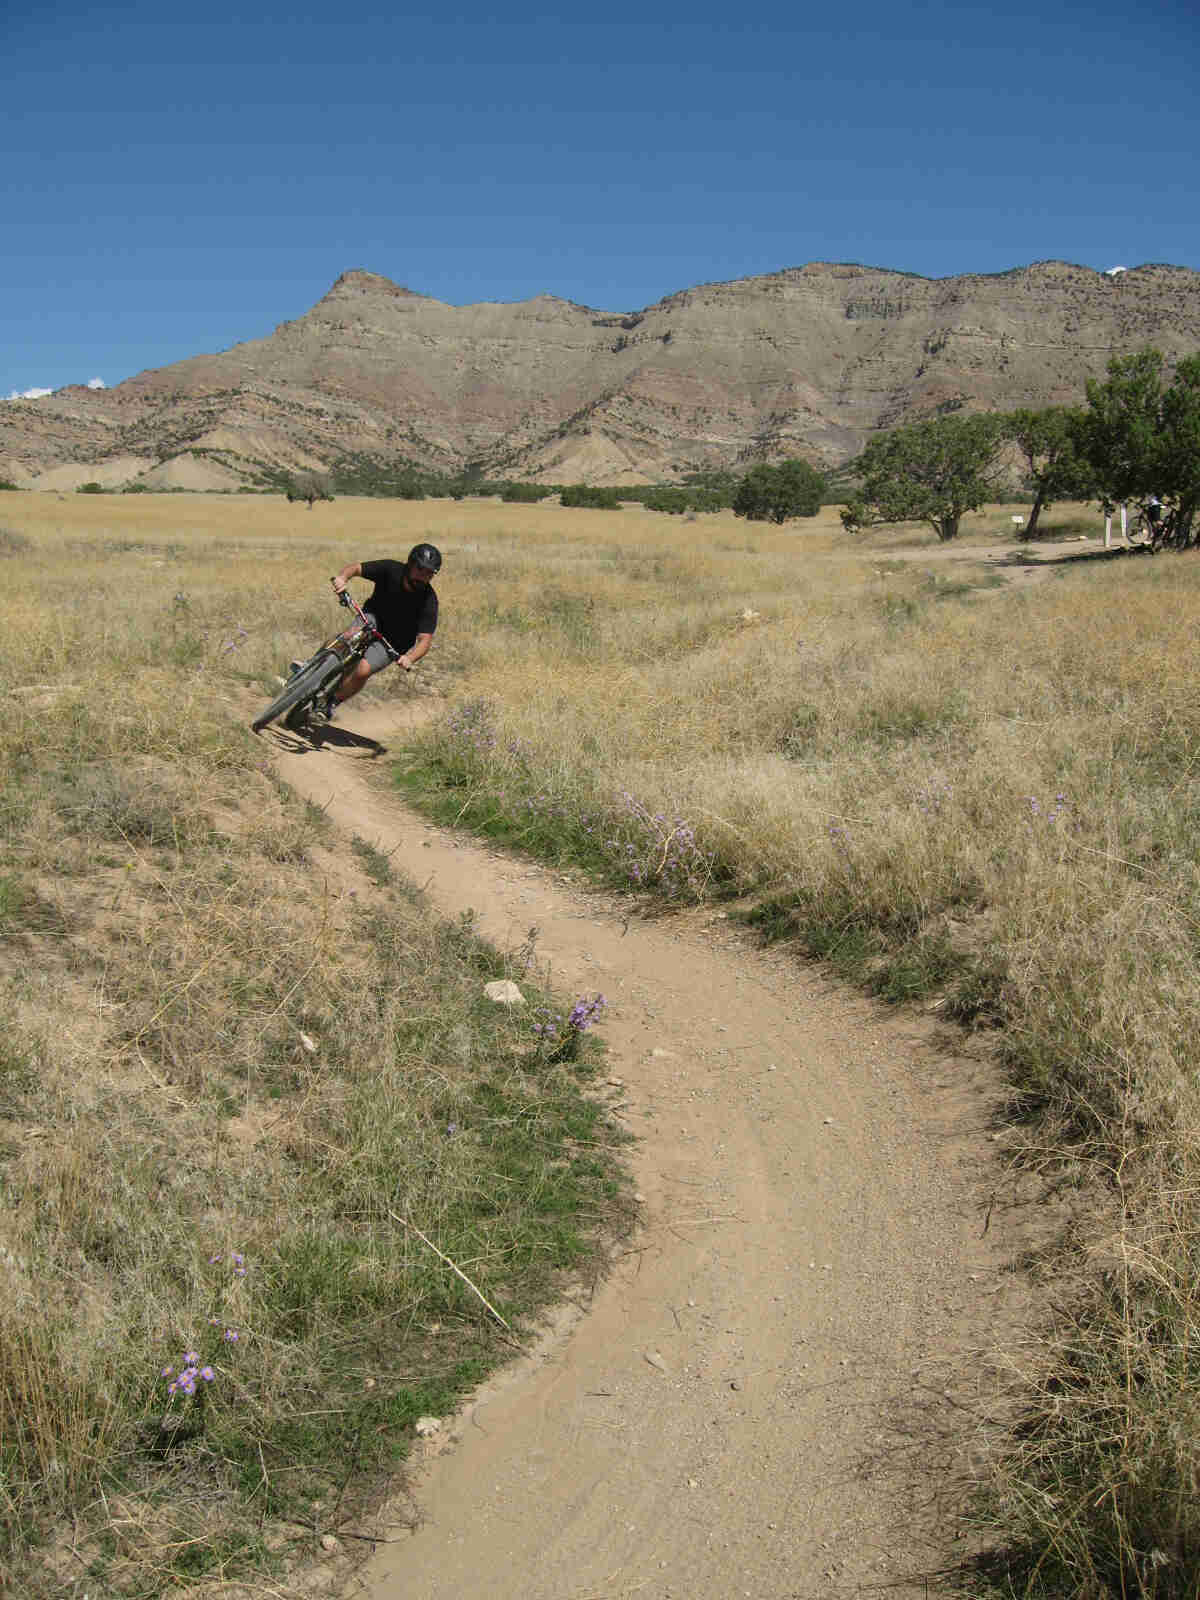 Front view of a cyclist riding a Surly bike, rounding a corner on a dirt trail, in a prairie field with mountains behind